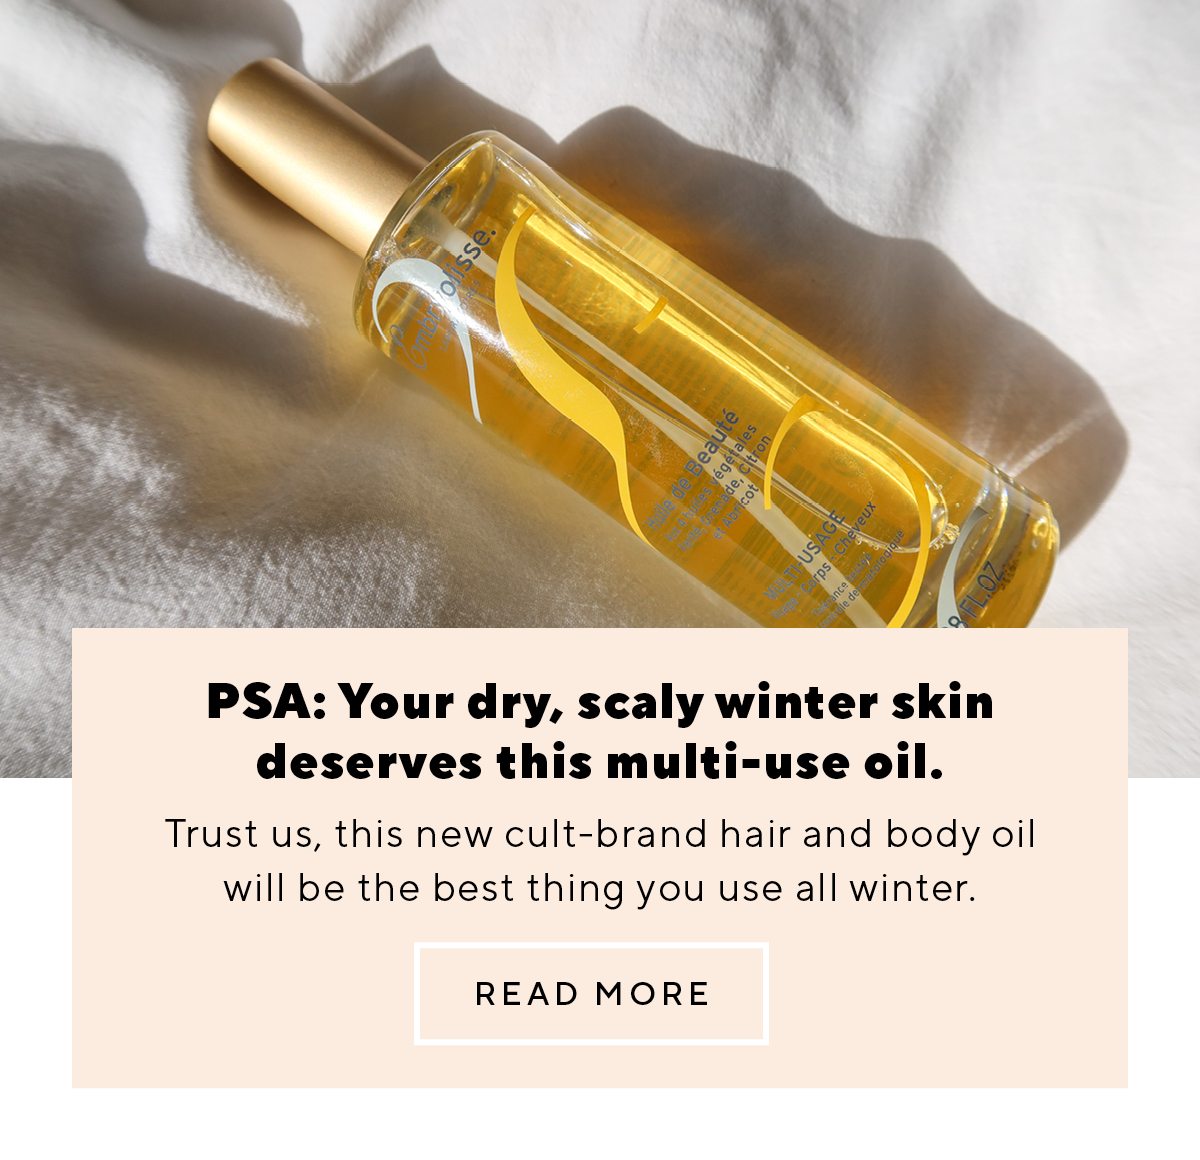 PSA: Your dry, scaly winter skin deserves this multi-use oil.